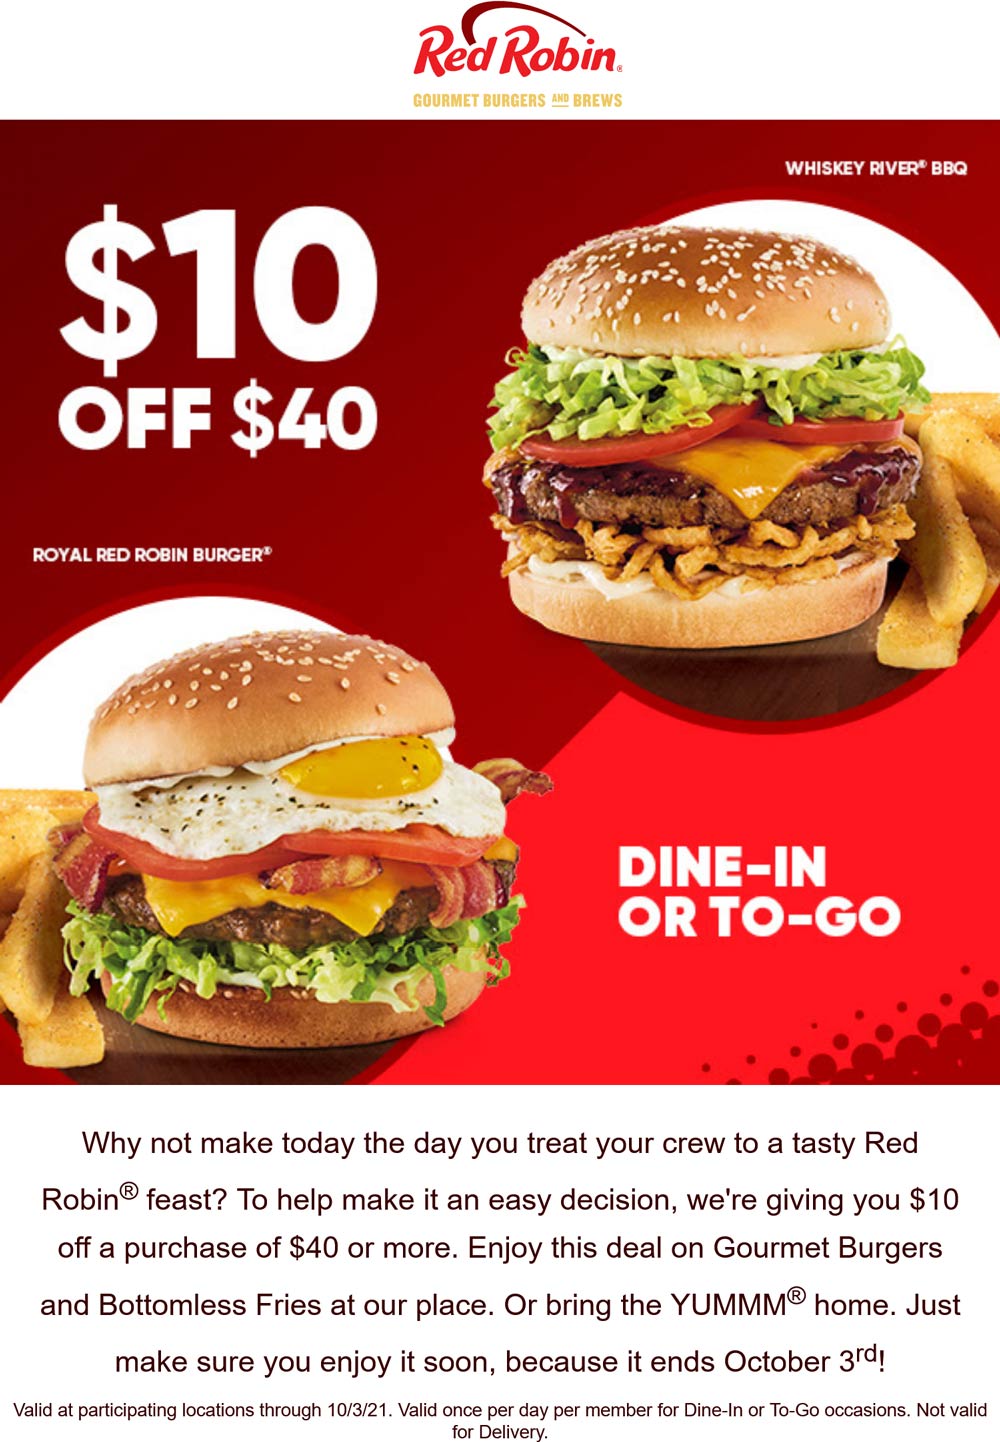 Red Robin restaurants Coupon  $10 off $40 today at Red Robin restaurants #redrobin 